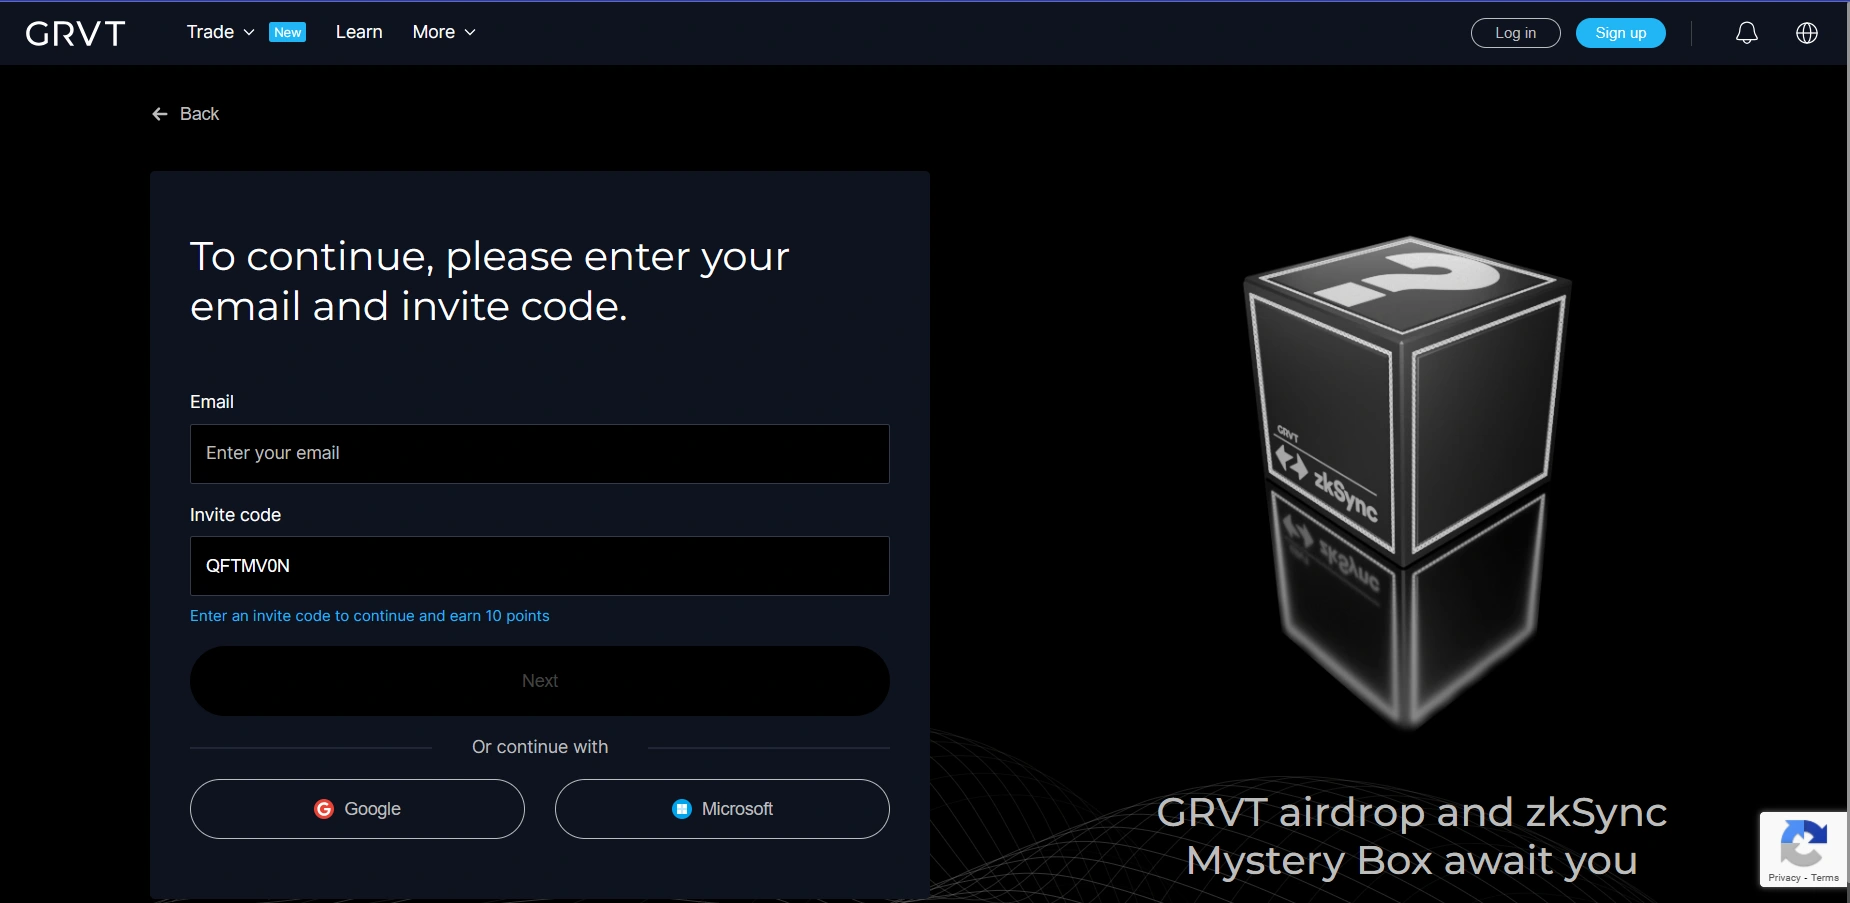 instructions for making grvt airdrop 65b9500be72d7